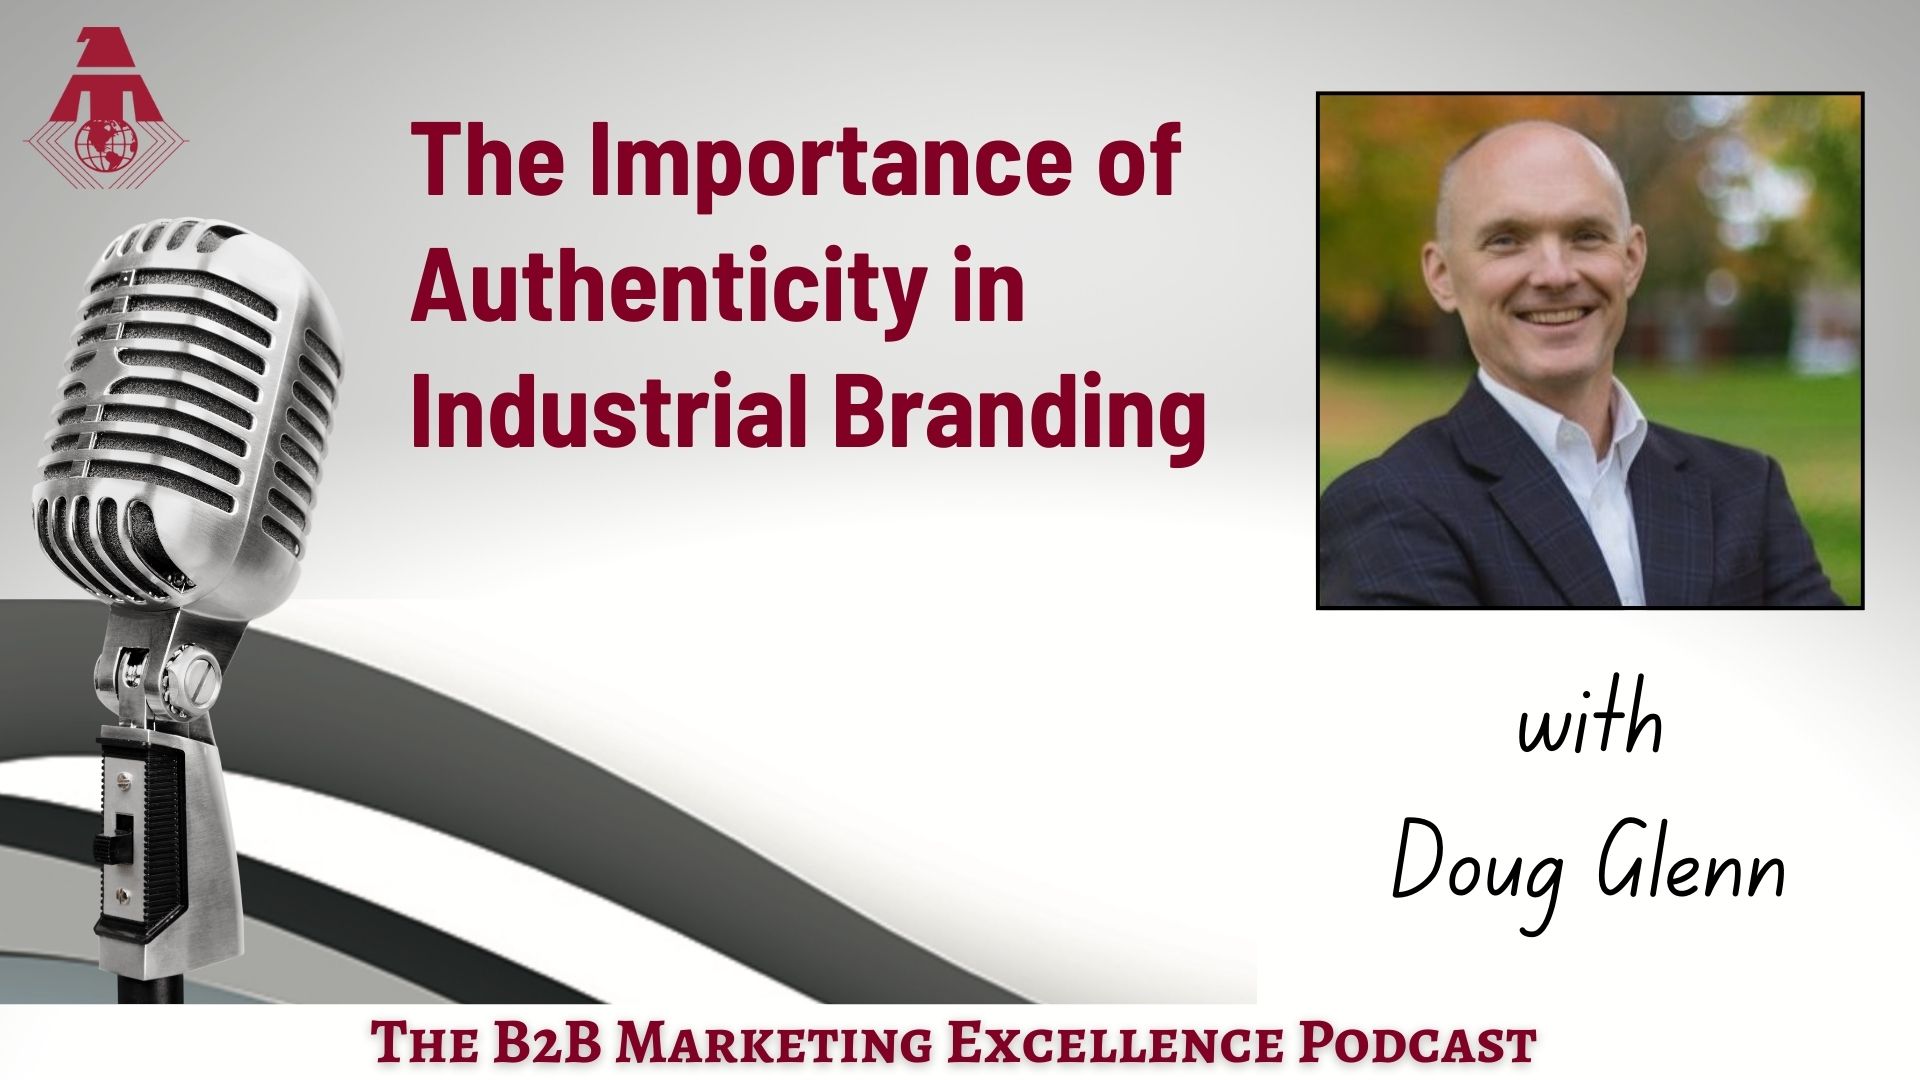 Podcast – The Importance of Authenticity in Industrial Branding: